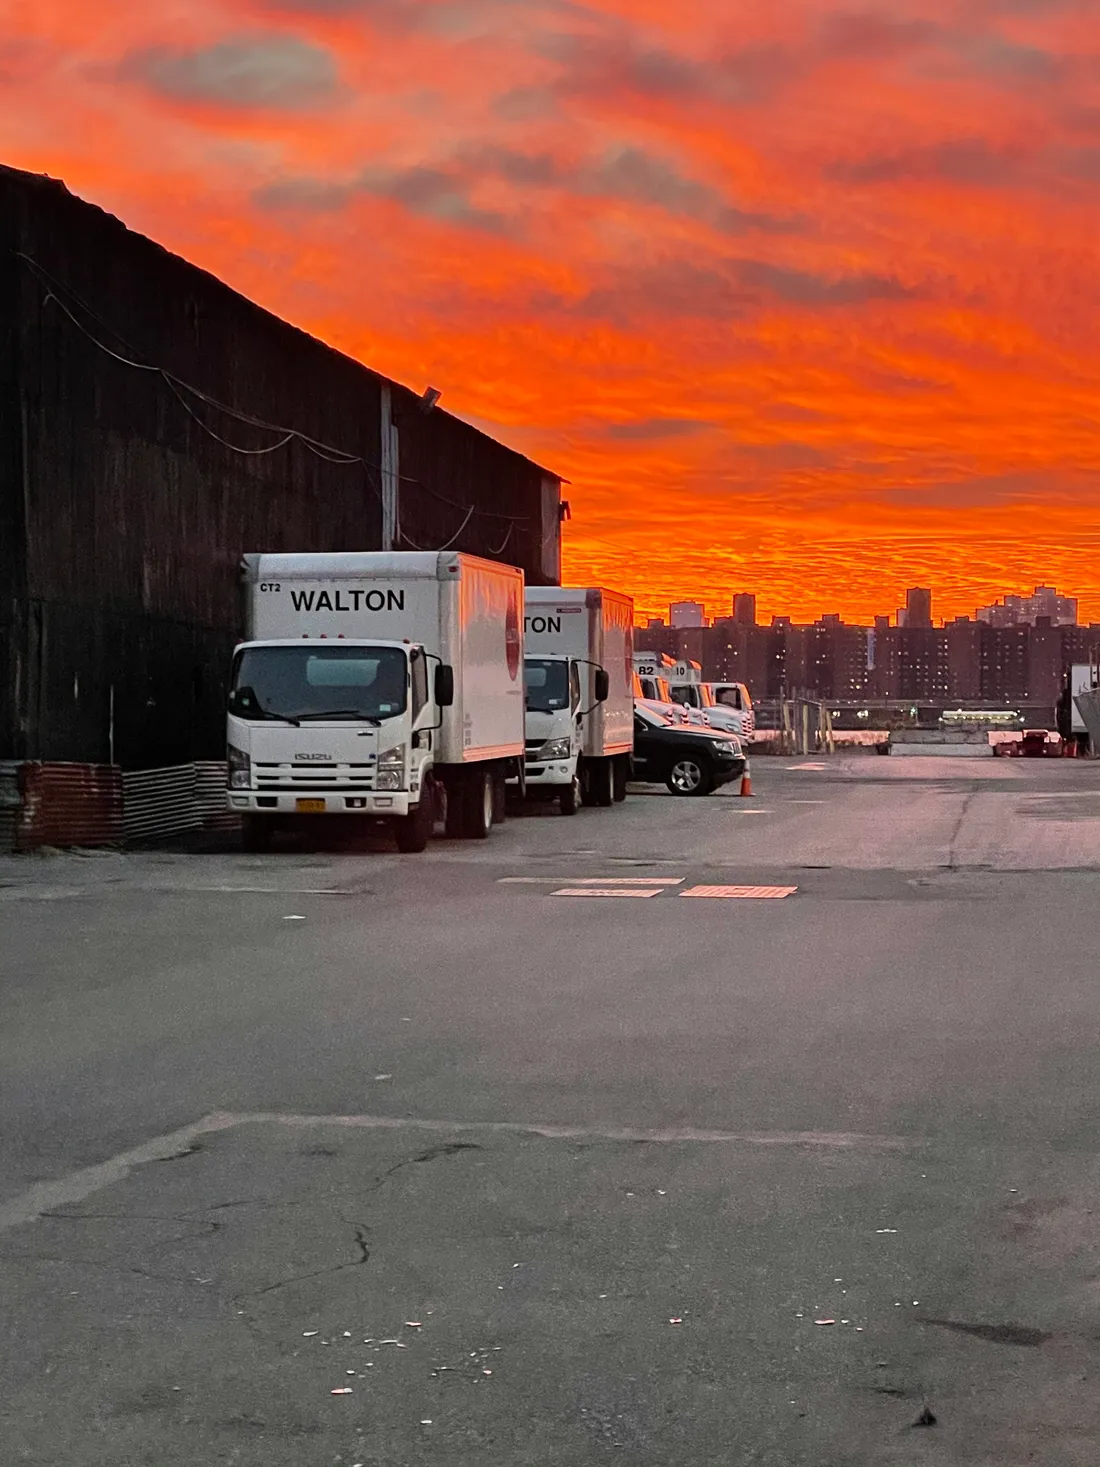 Line of parked trucks against a fiery sunset